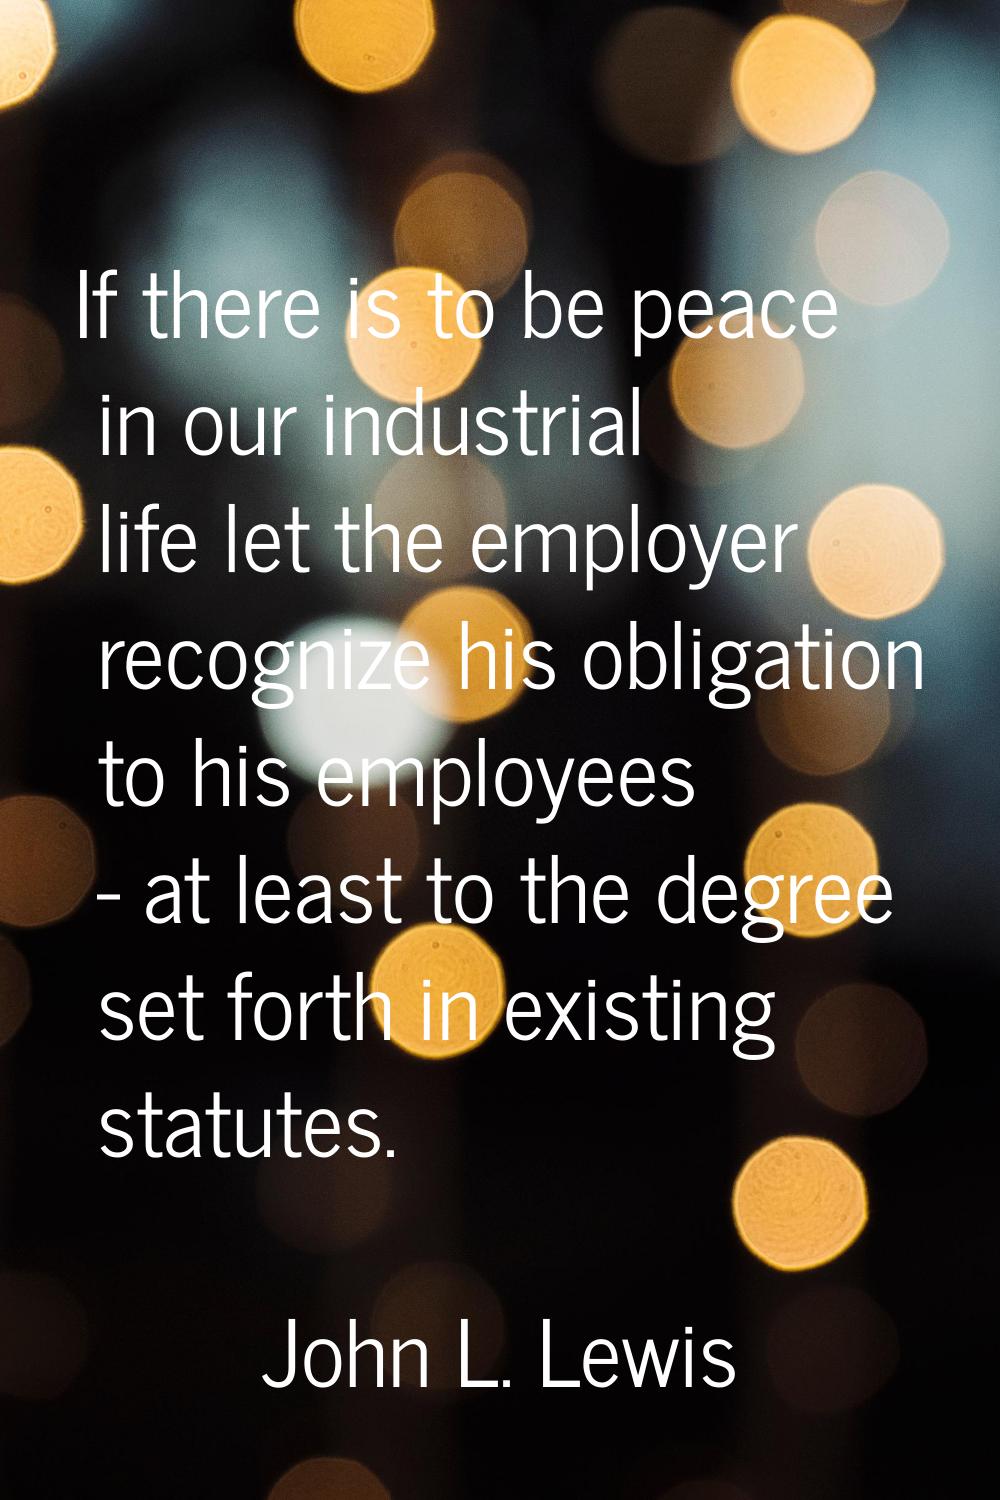 If there is to be peace in our industrial life let the employer recognize his obligation to his emp